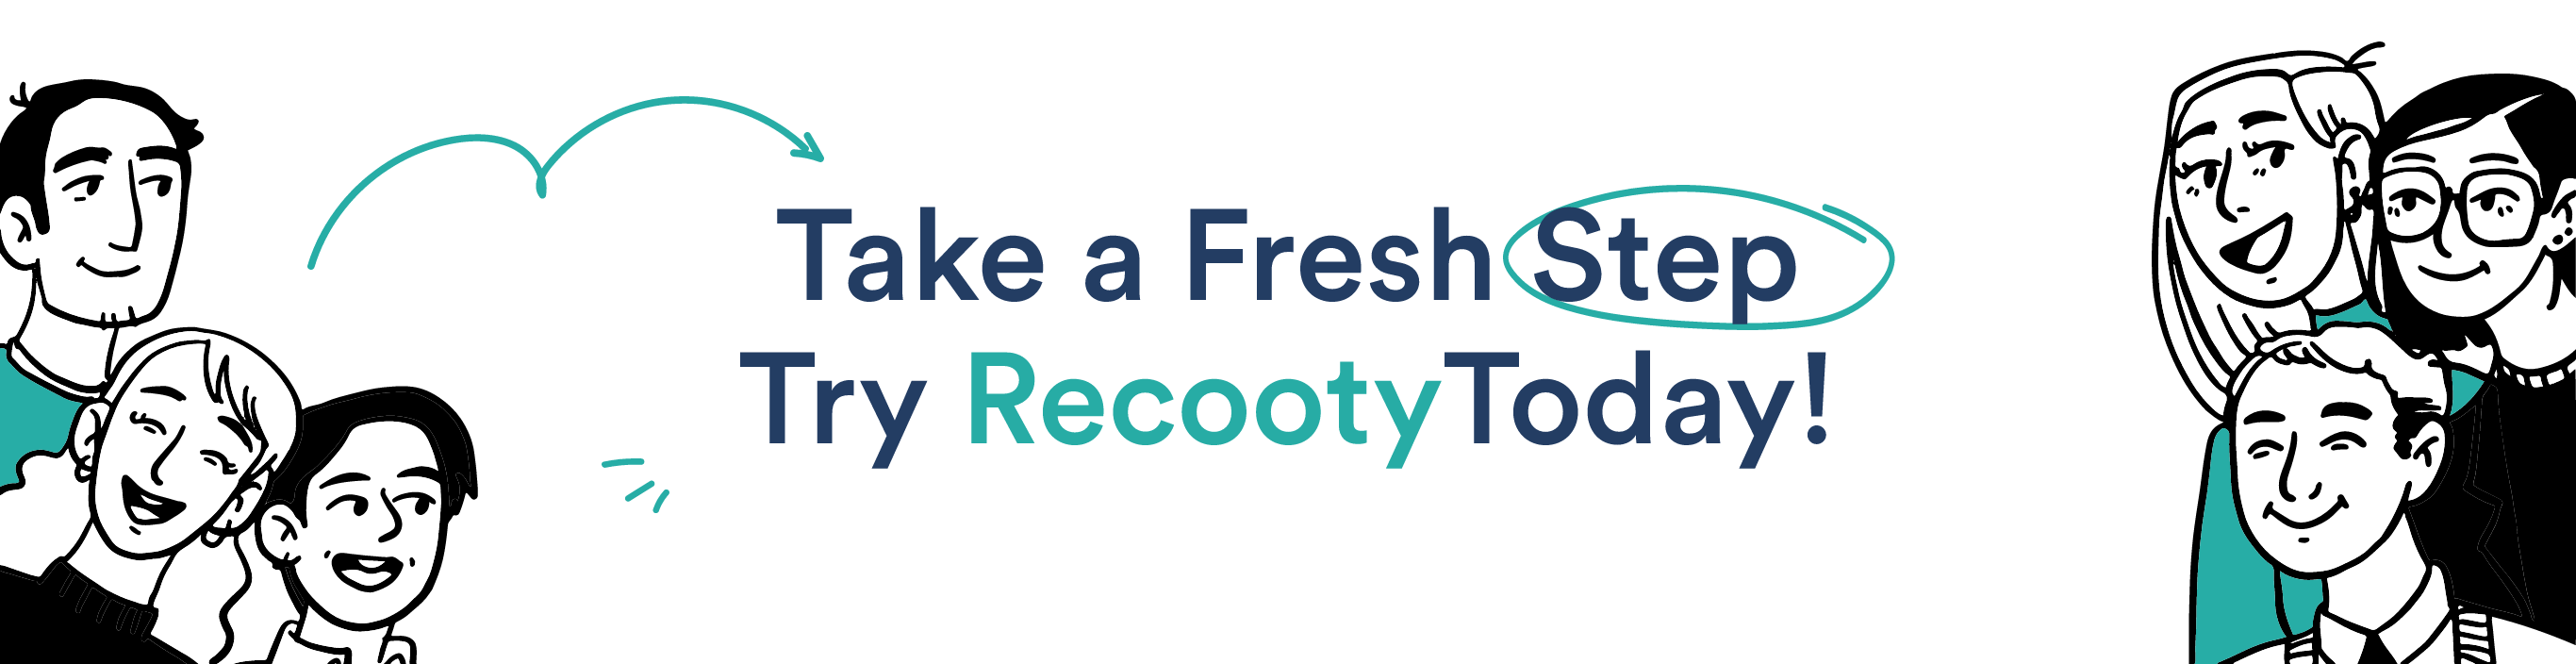 try recooty